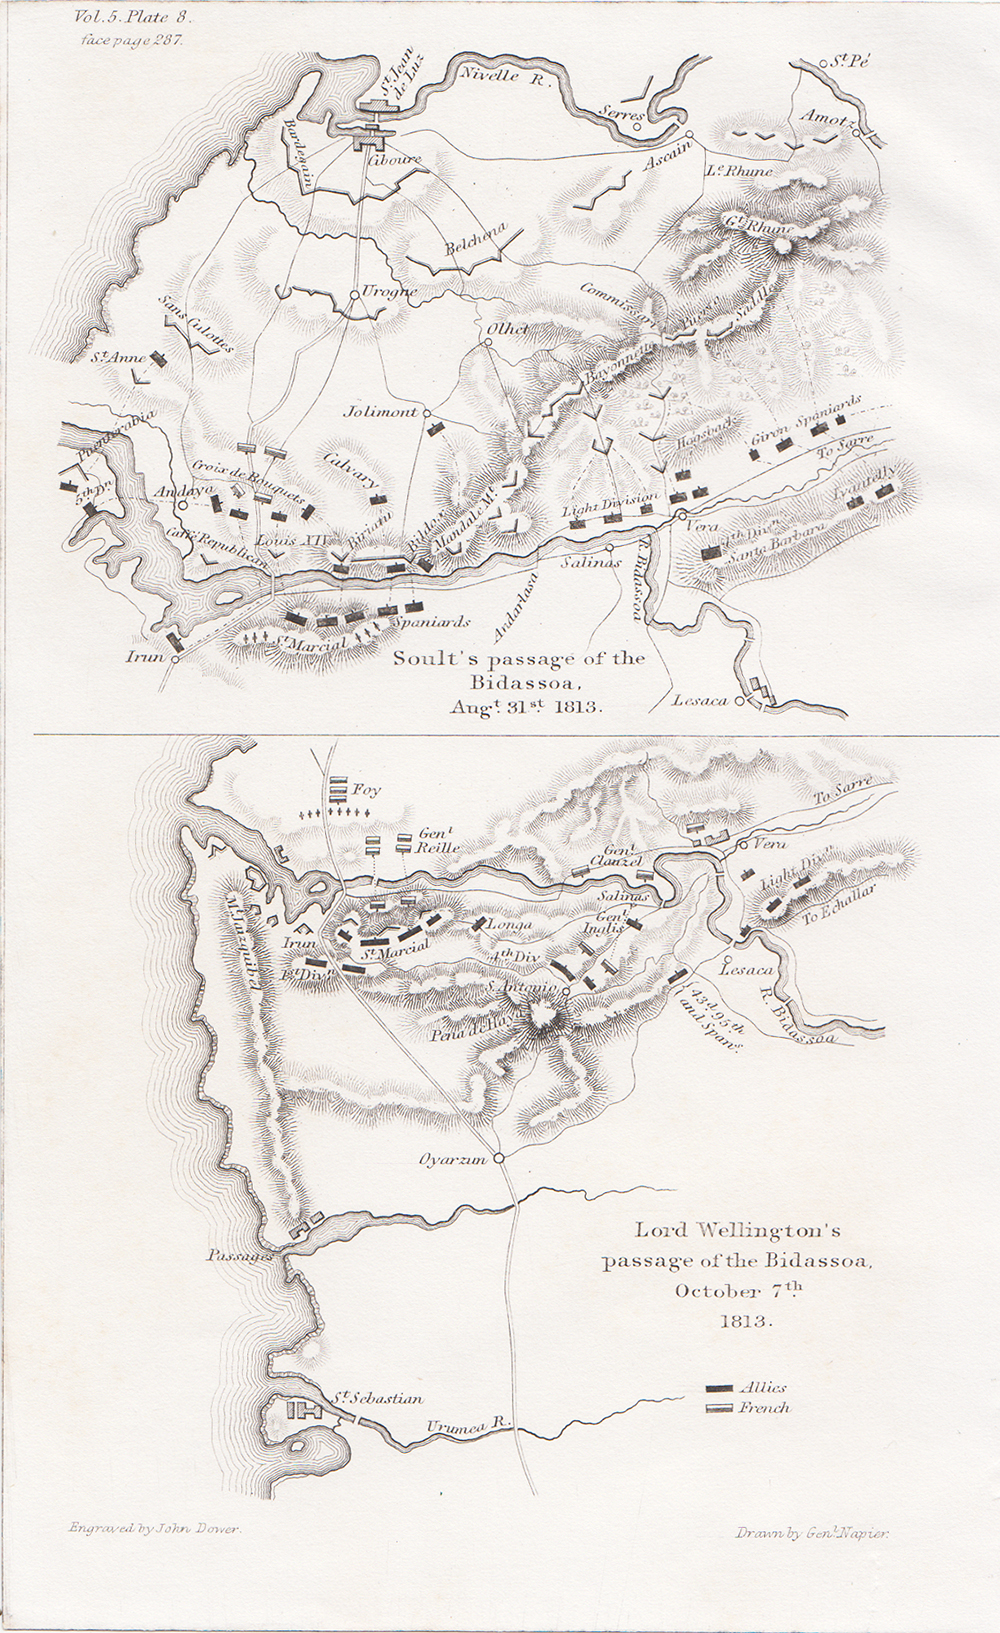 Soult's passage of the Bidassoa Aug 31st 1813 and Lord Wellington's passage of the Bidassoa October 7th 1813